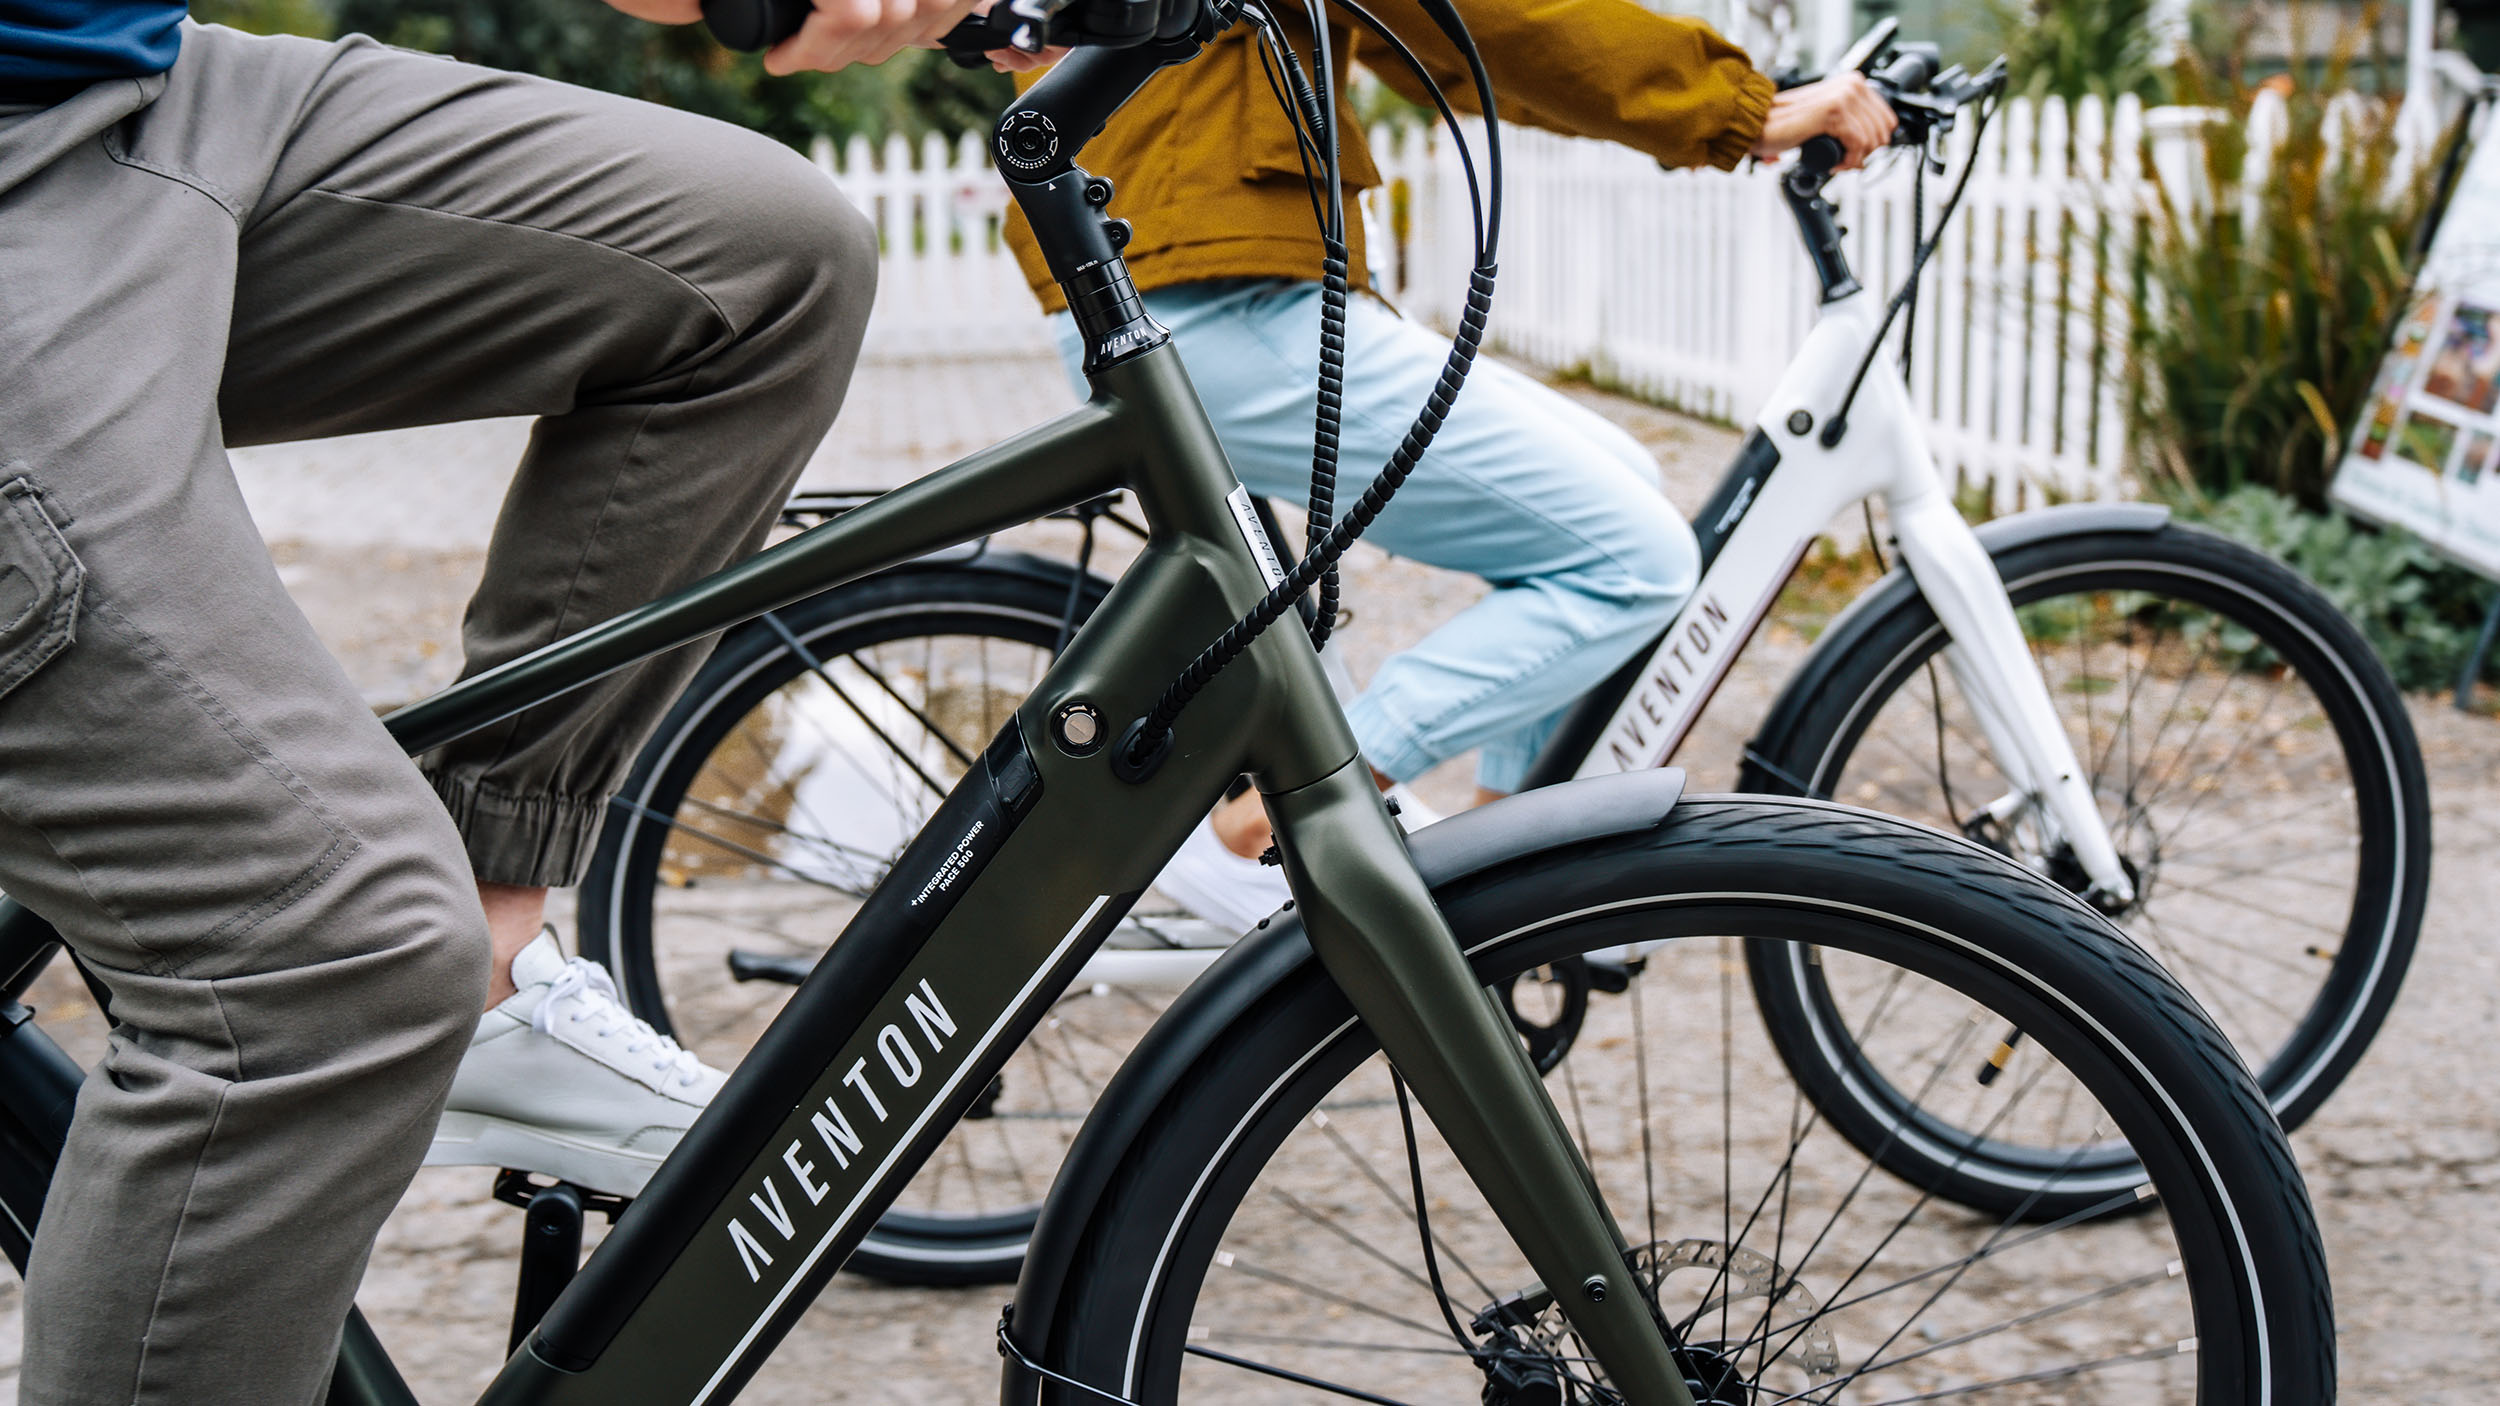 The Updated Aventon Pace 500.3: an Electric Cruiser for Casual Adventures